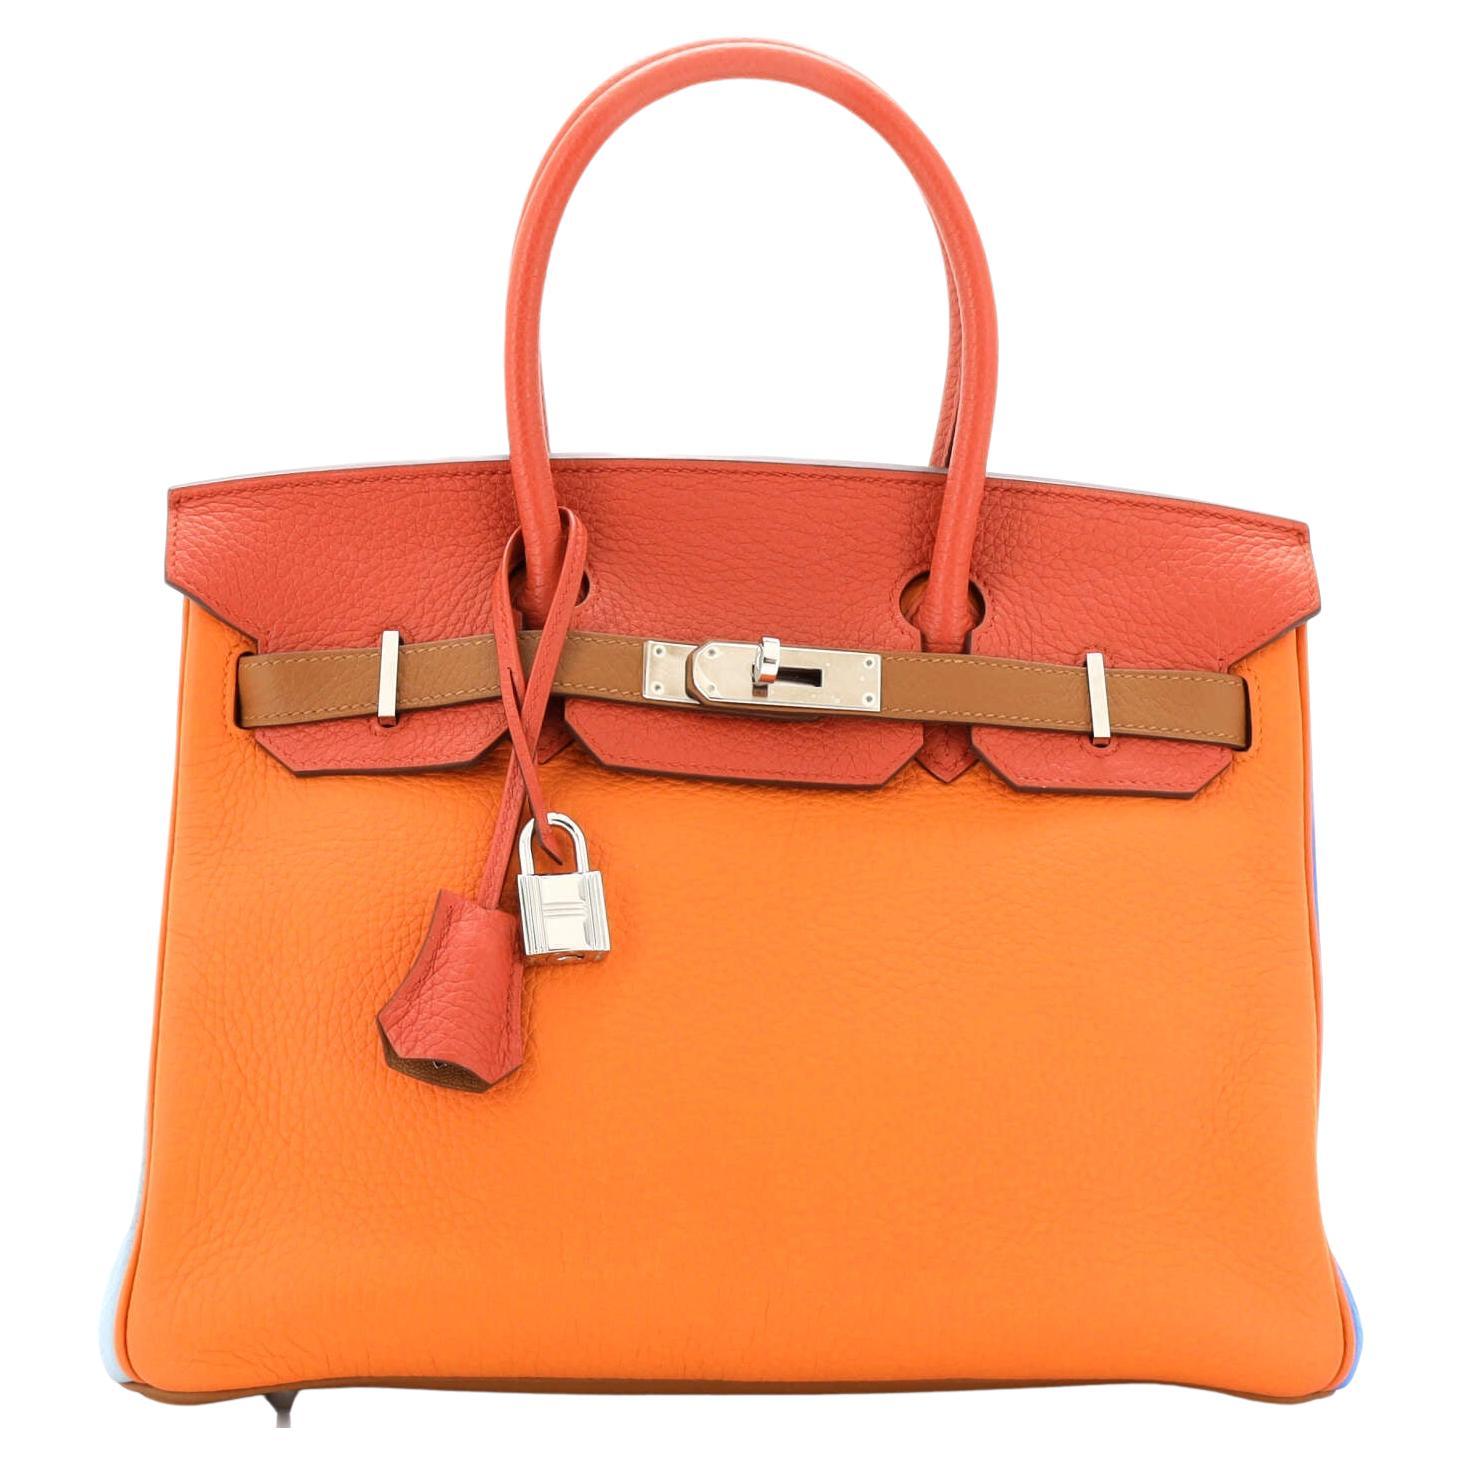 Hermès Gris Etain Birkin 30cm of Clemence Leather with Gold